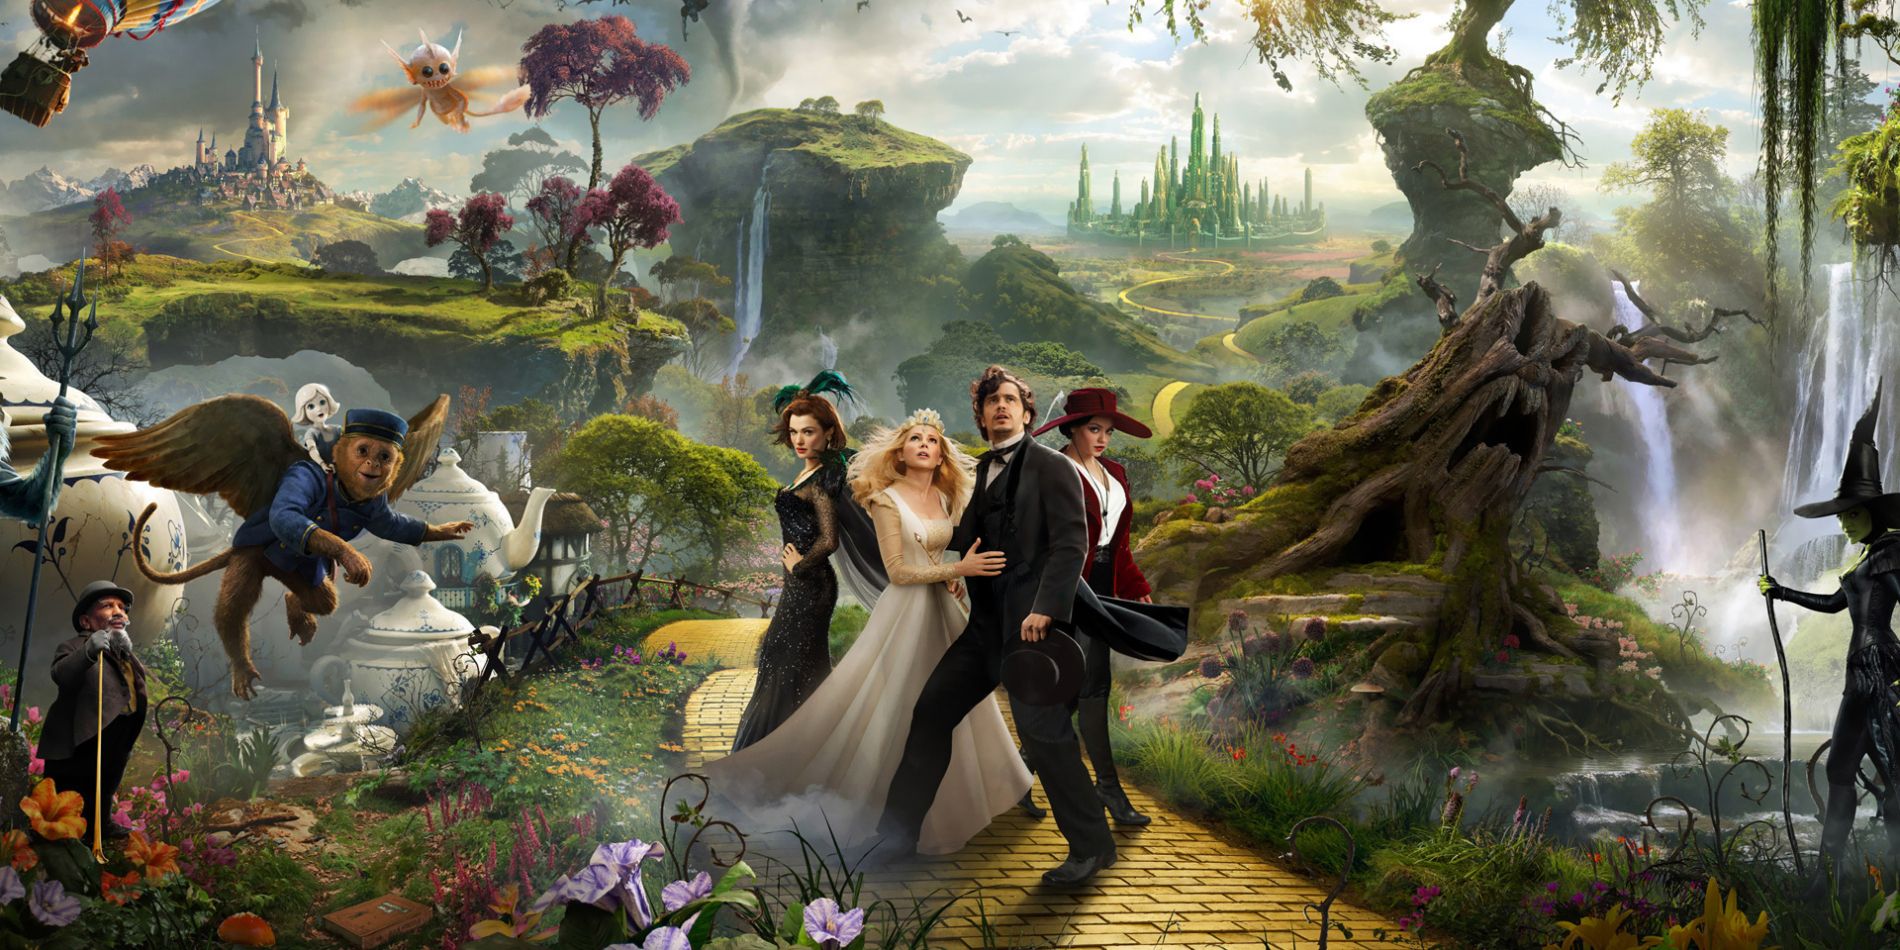 Oz The Great And Powerful 2 Updates Will The Sam Raimi